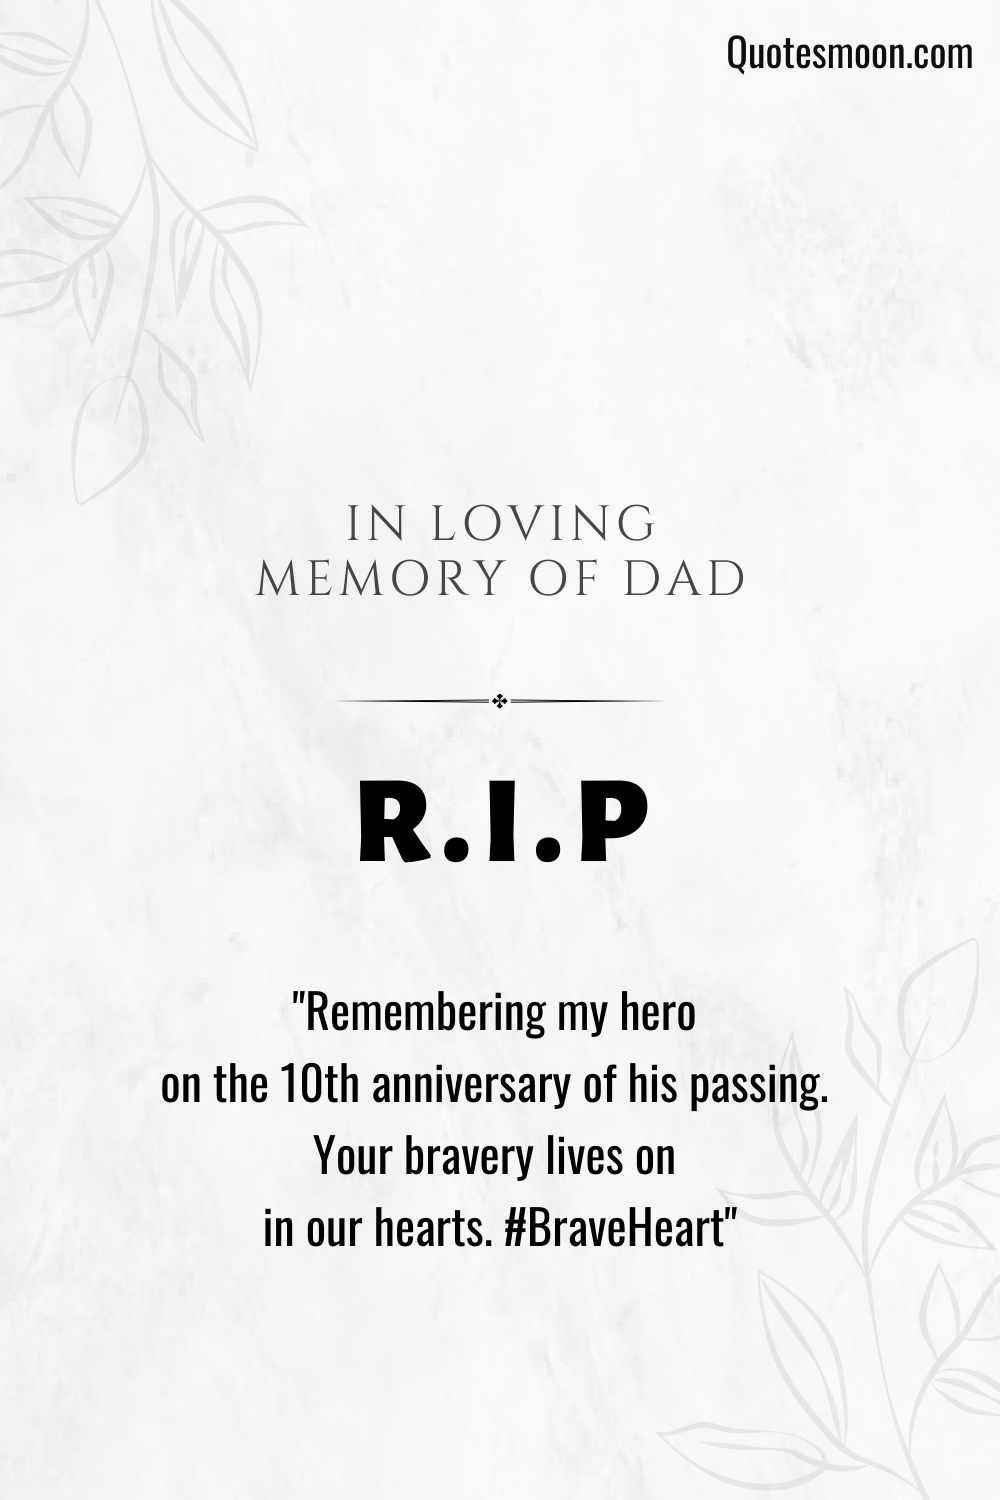 emotional message for dad death anniversary with images HD